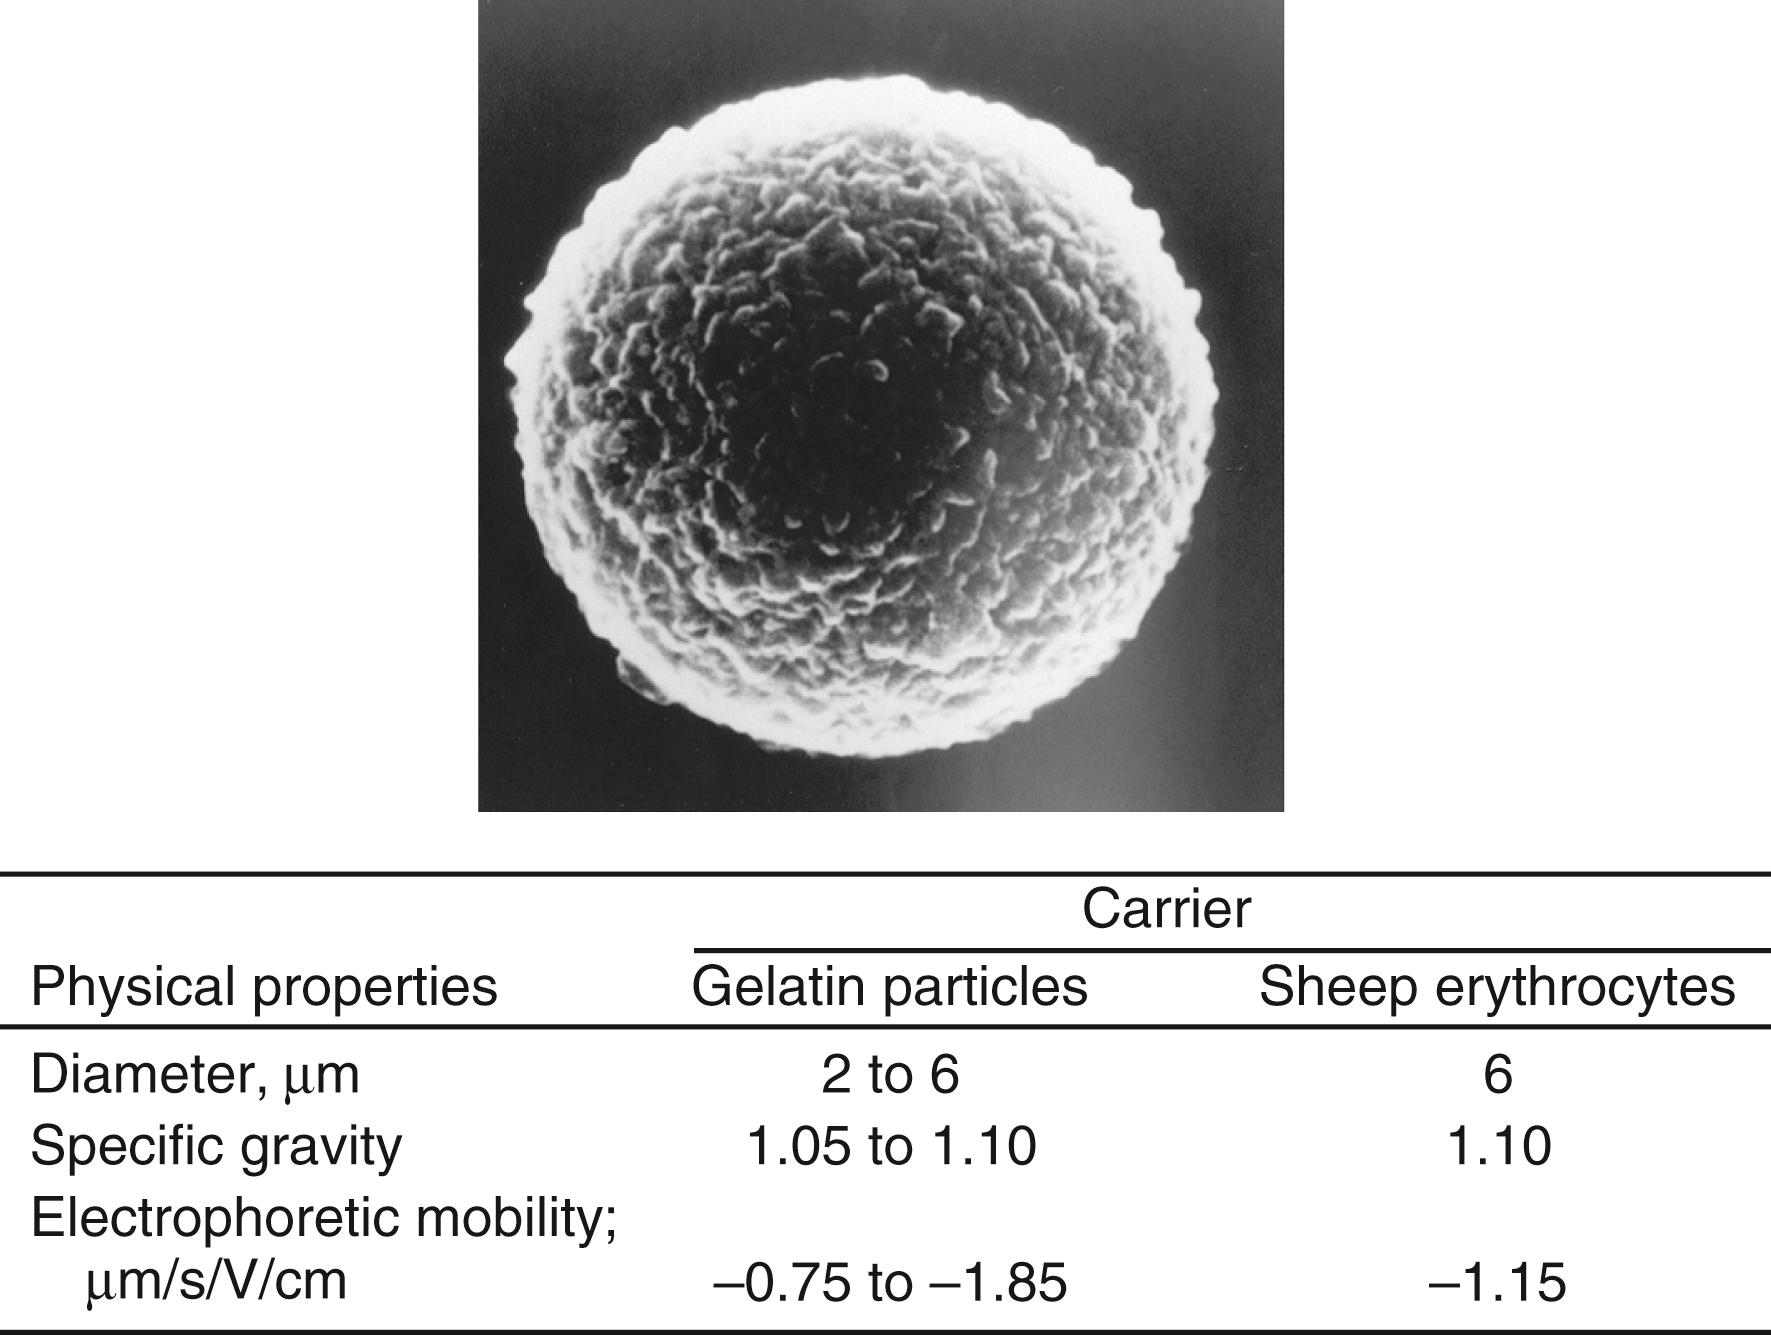 Figure 45.8, Electron micrograph (×25,000) and physical properties of gelatin particles in comparison with sheep erythrocytes.